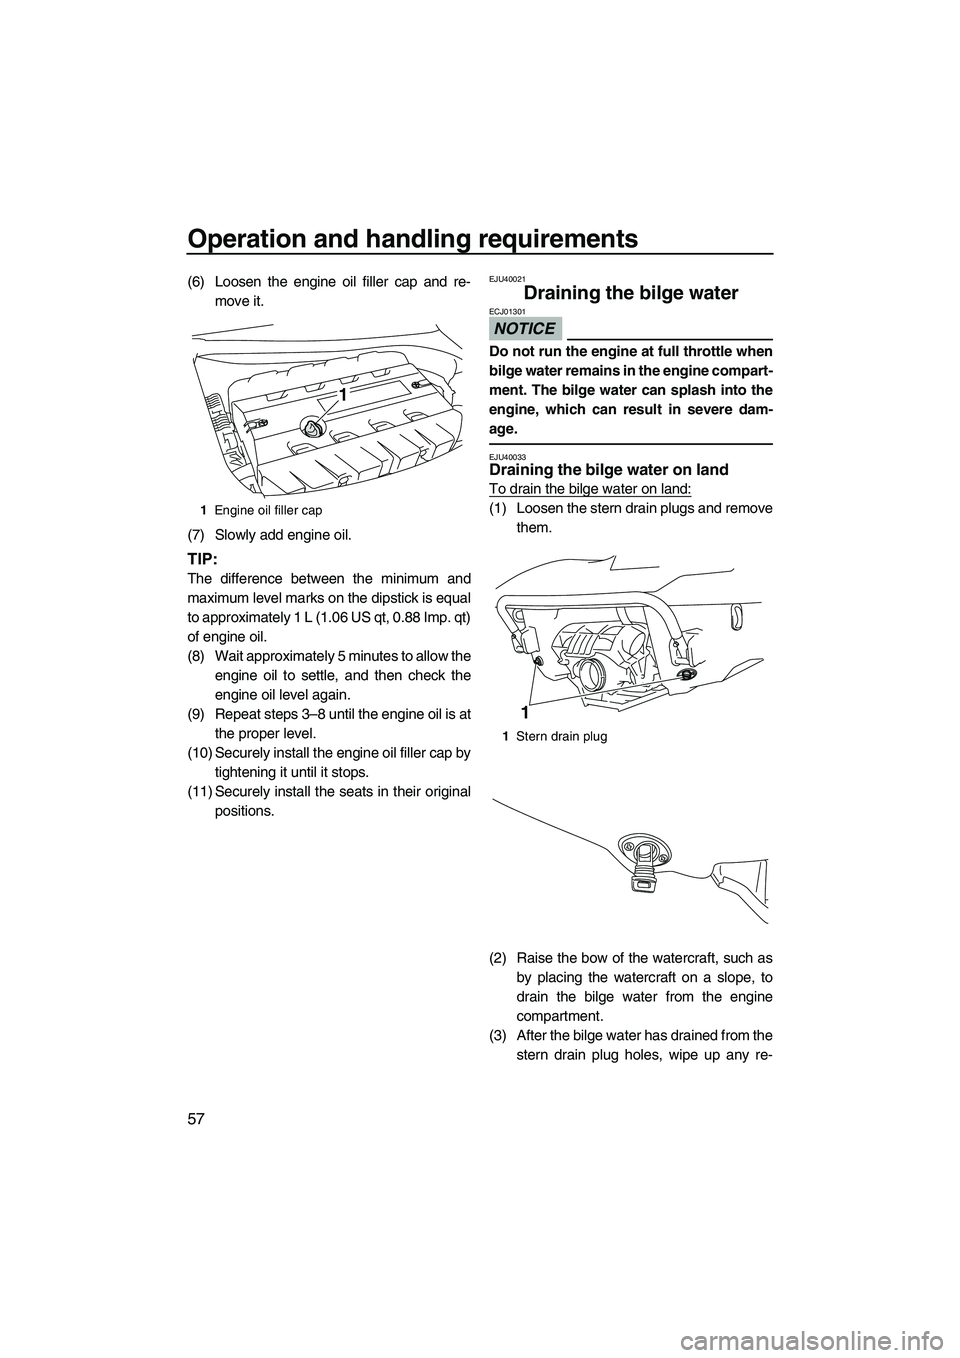 YAMAHA FX SHO 2010  Owners Manual Operation and handling requirements
57
(6) Loosen the engine oil filler cap and re-
move it.
(7) Slowly add engine oil.
TIP:
The difference between the minimum and
maximum level marks on the dipstick 